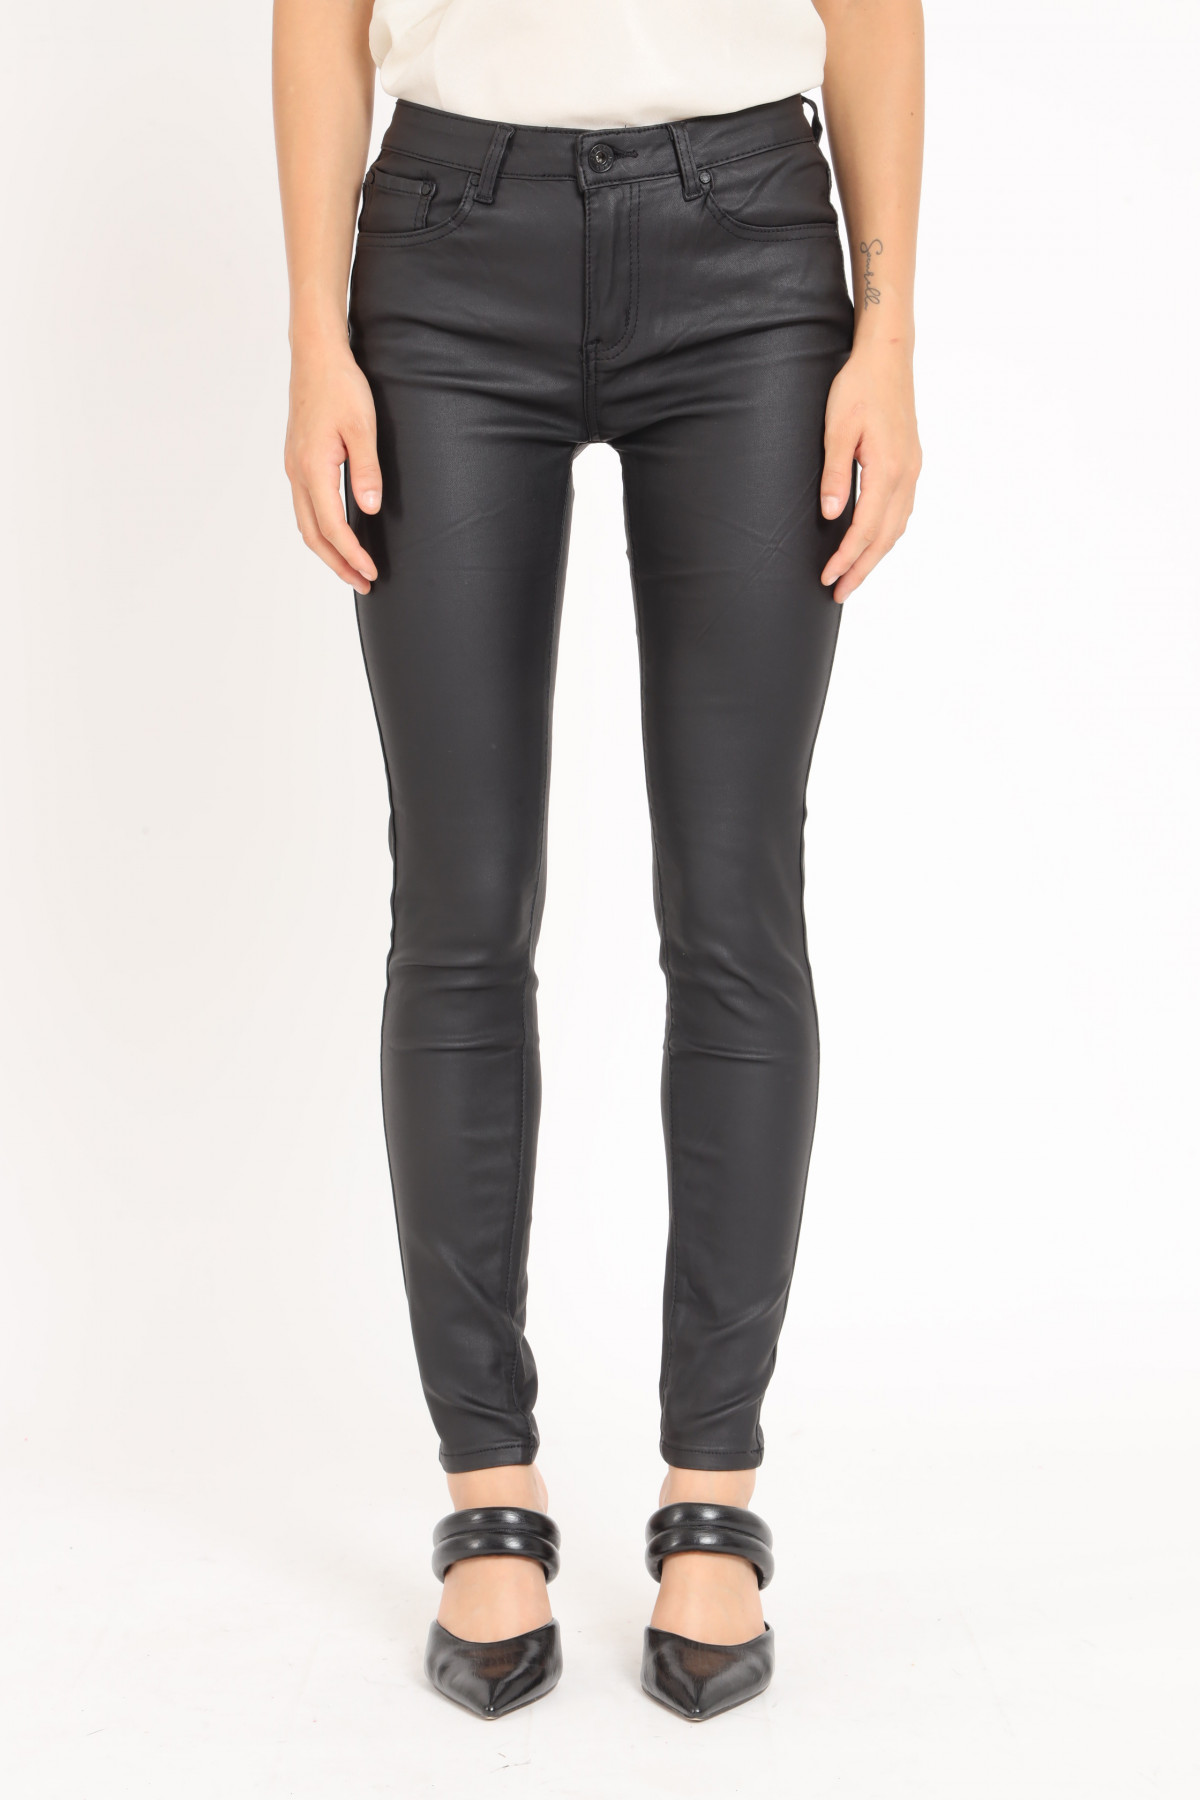 5 Pockets Skinny Faux Leather Pants